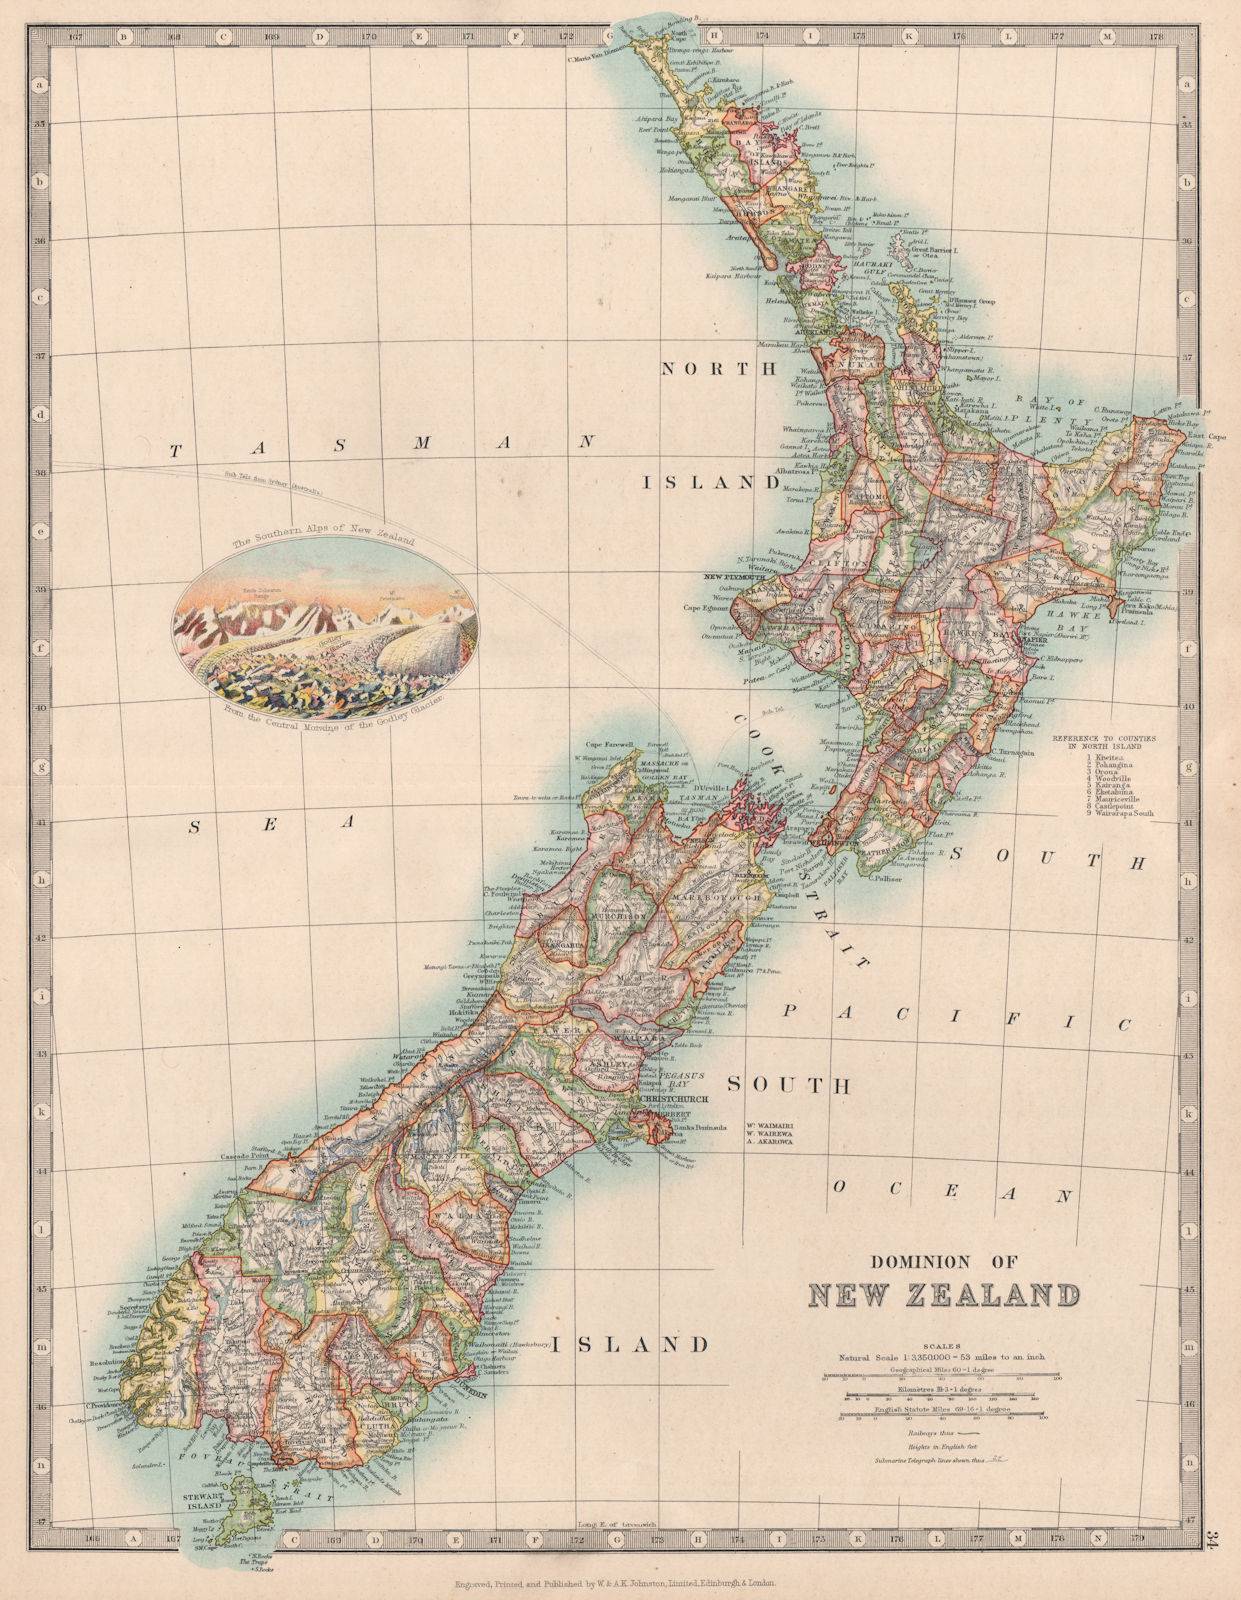 DOMINION OF NEW ZEALAND in counties. Godley Glacier vignette. JOHNSTON 1912 map